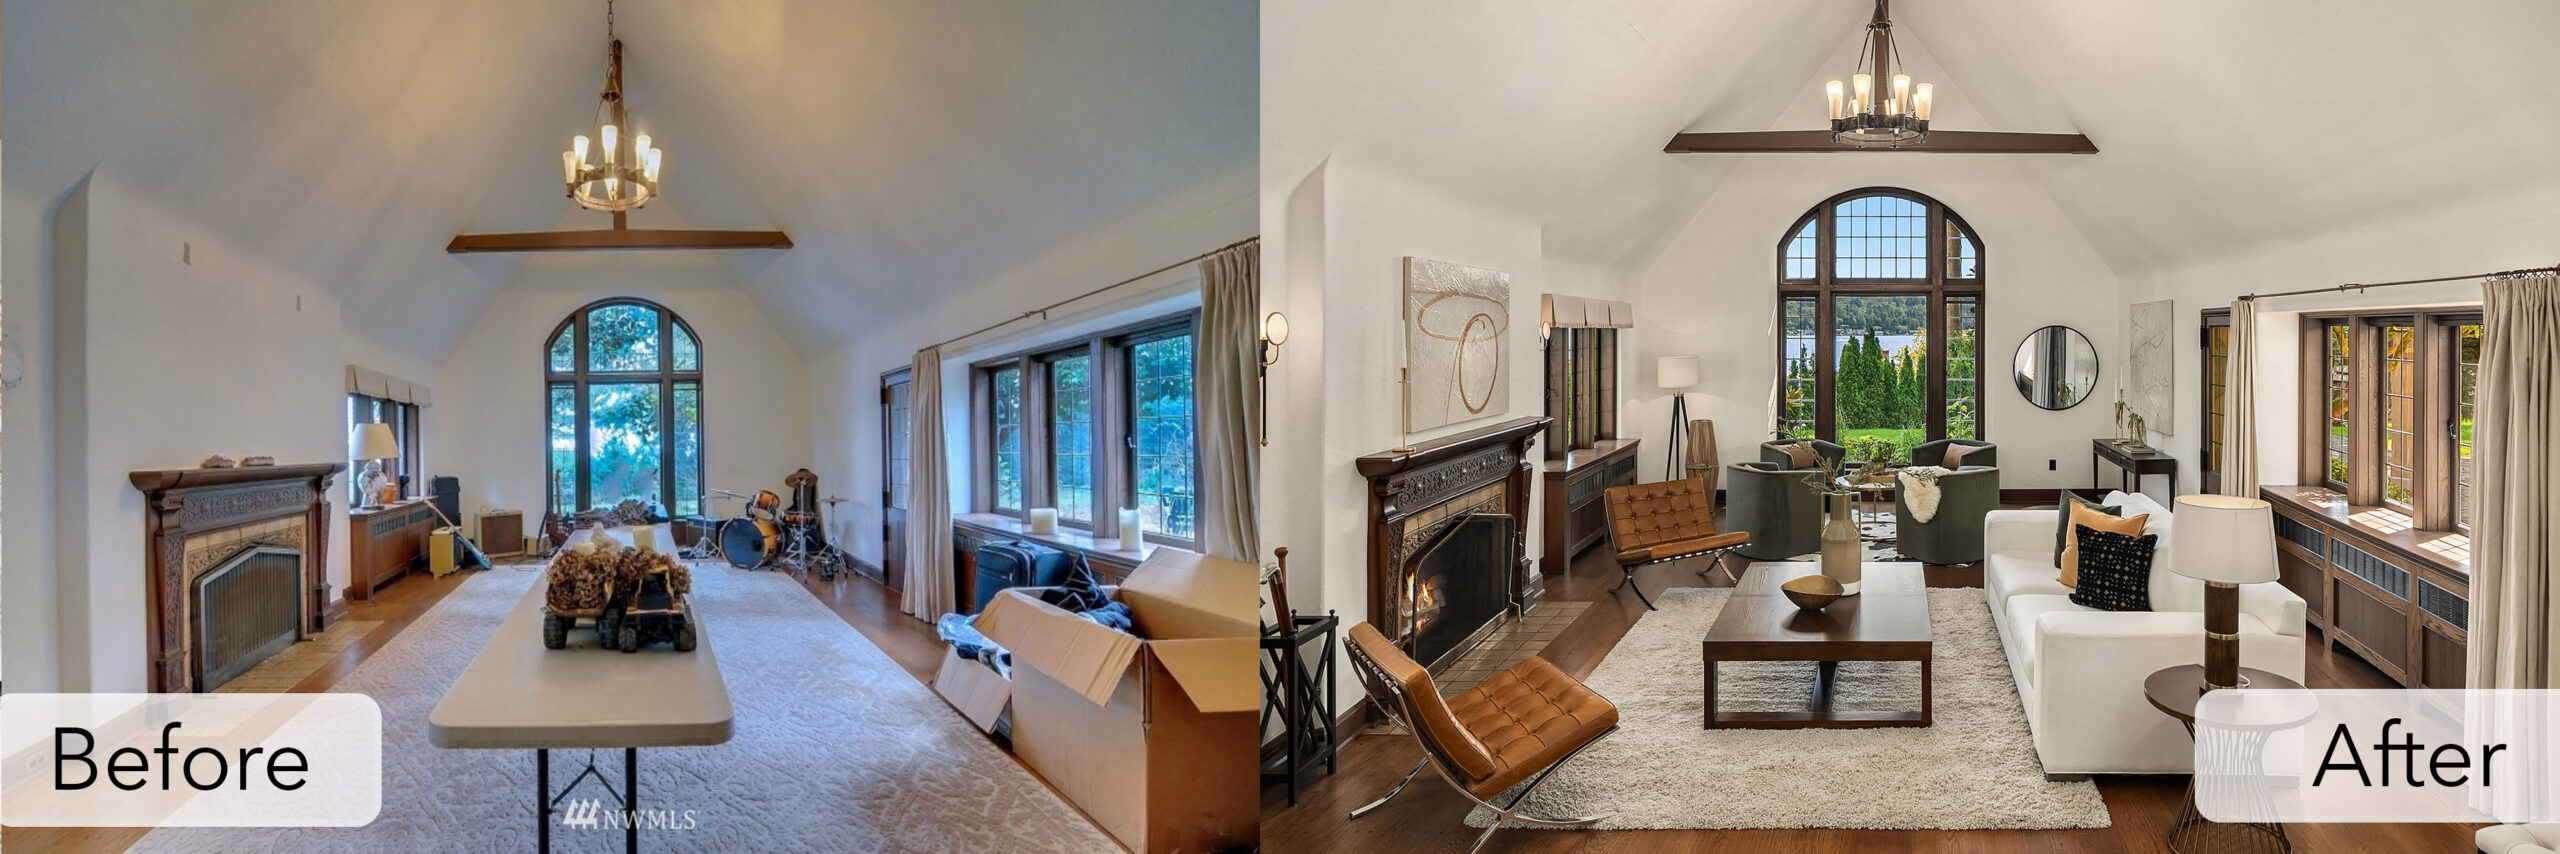 luxury mercer island home formal living room before and after